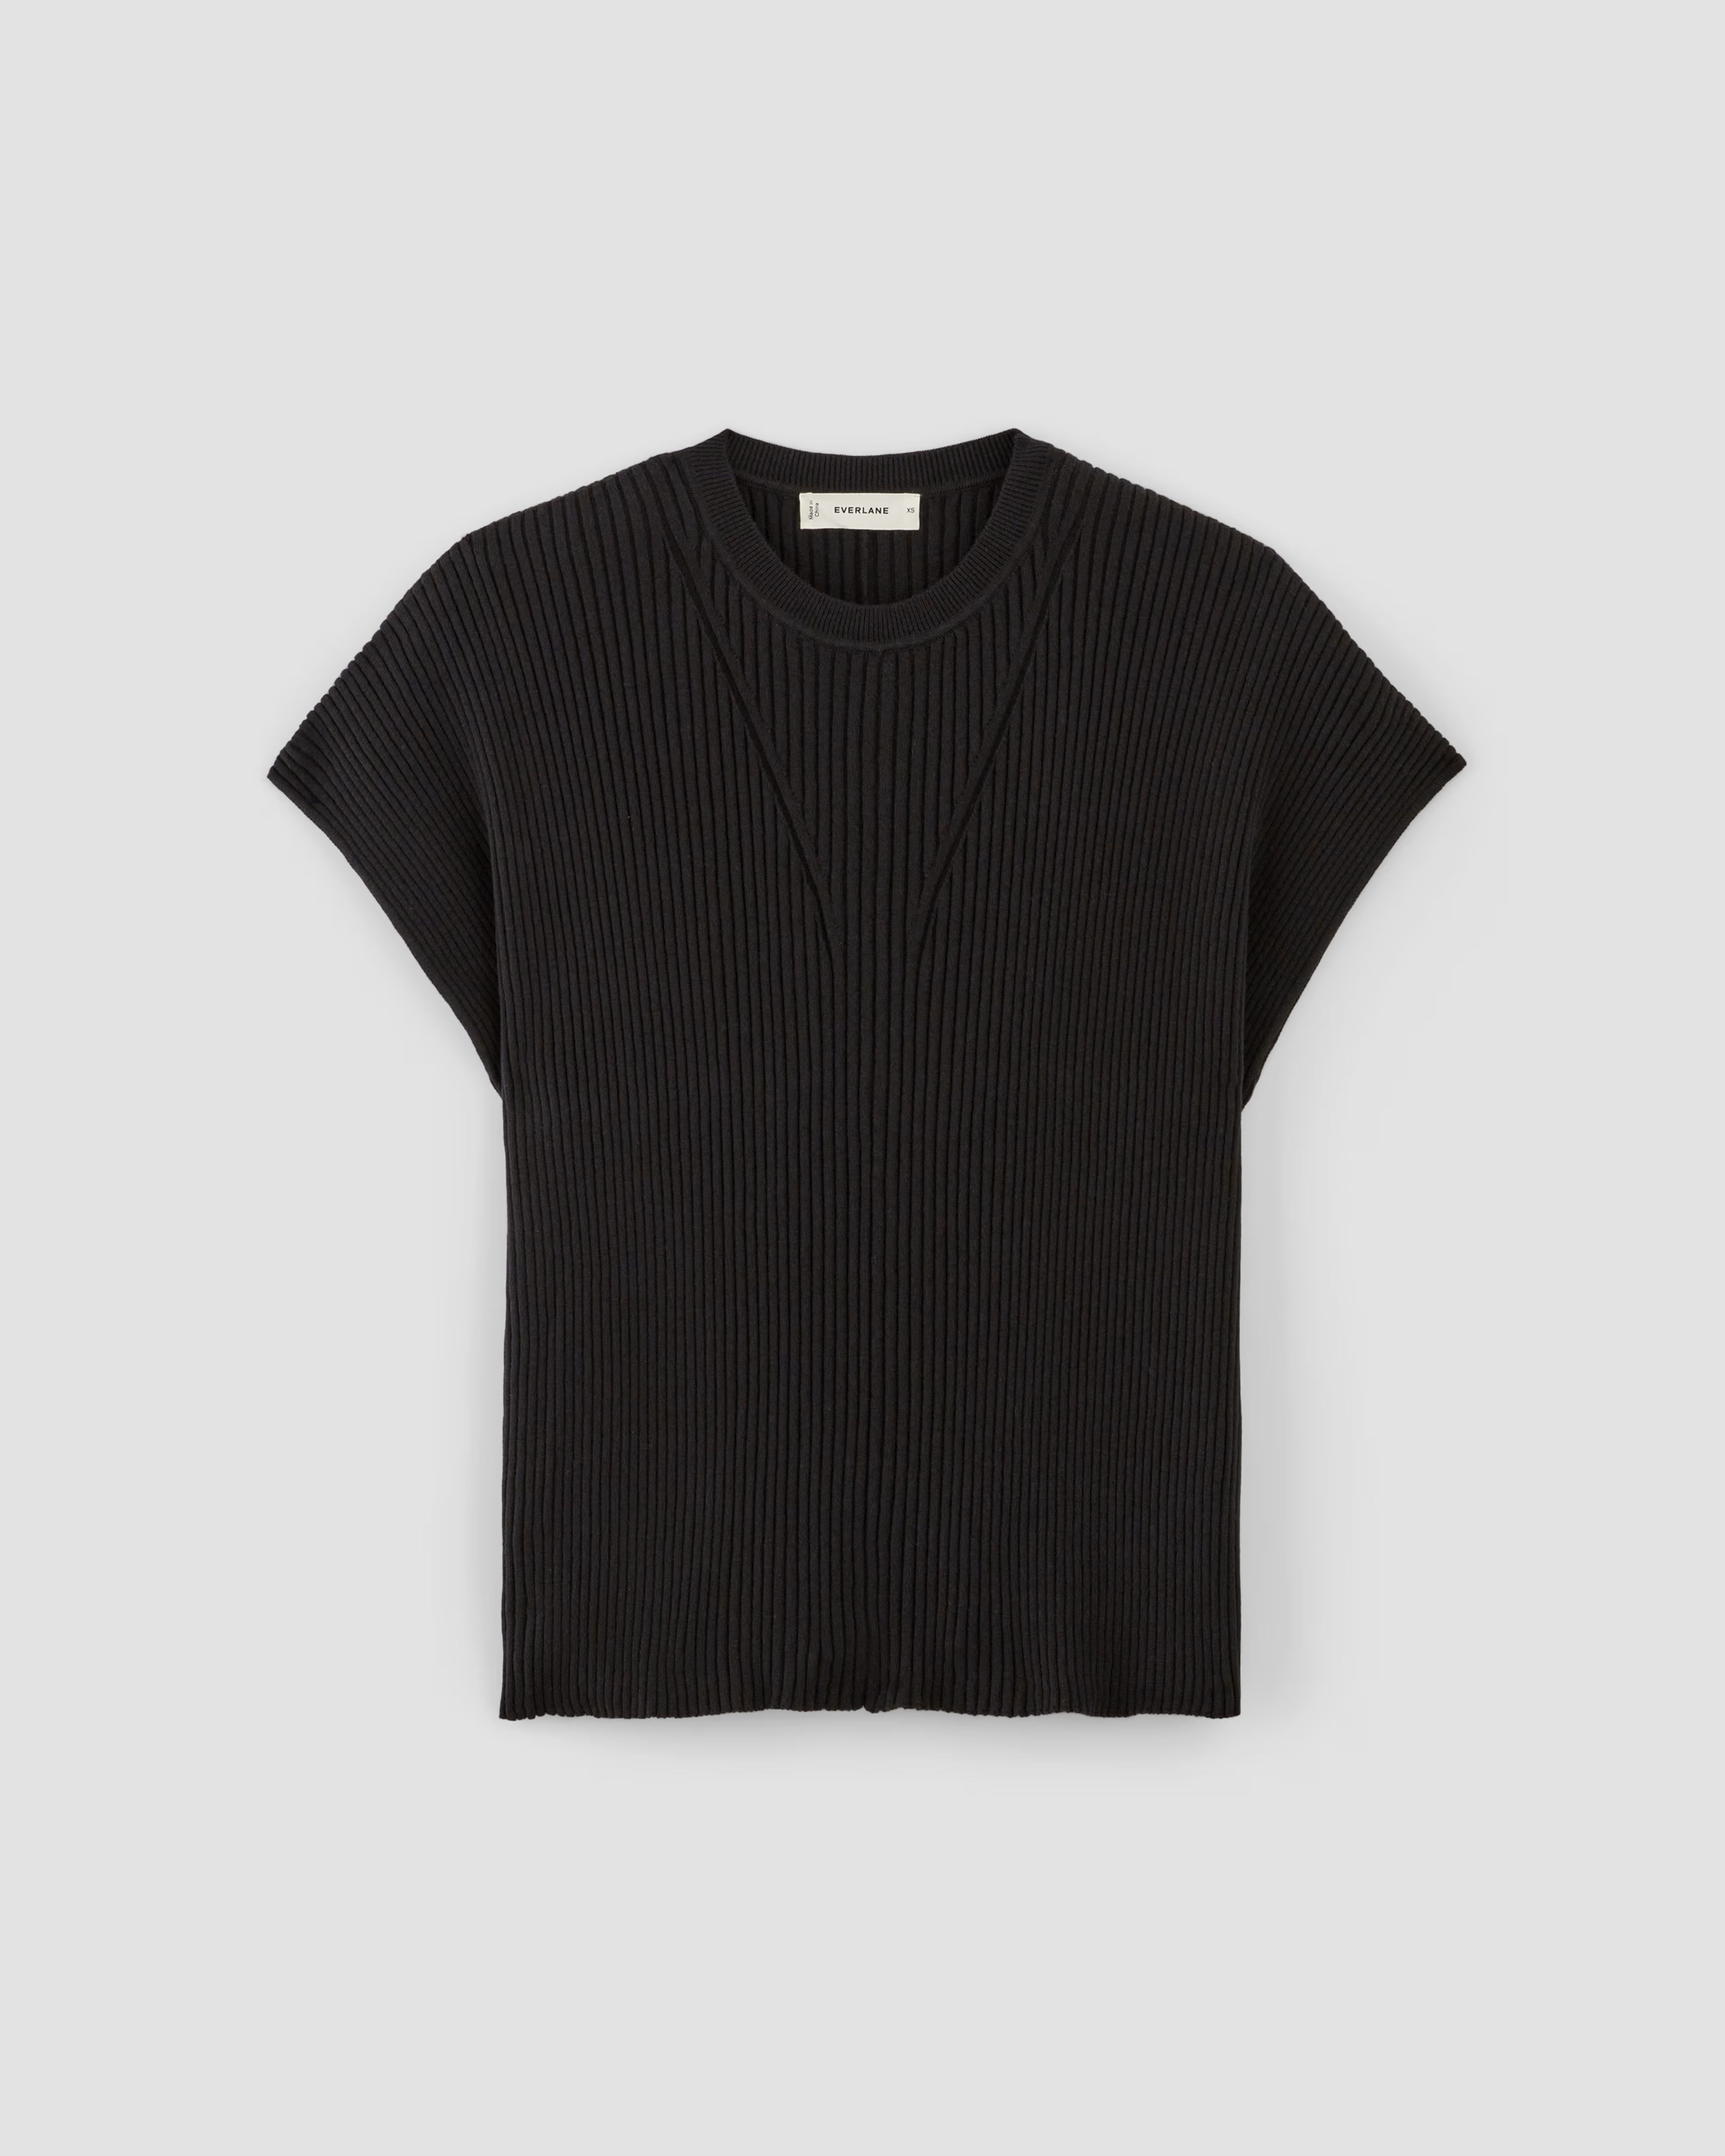 The Cotton Knit Caftan Top | Everlane